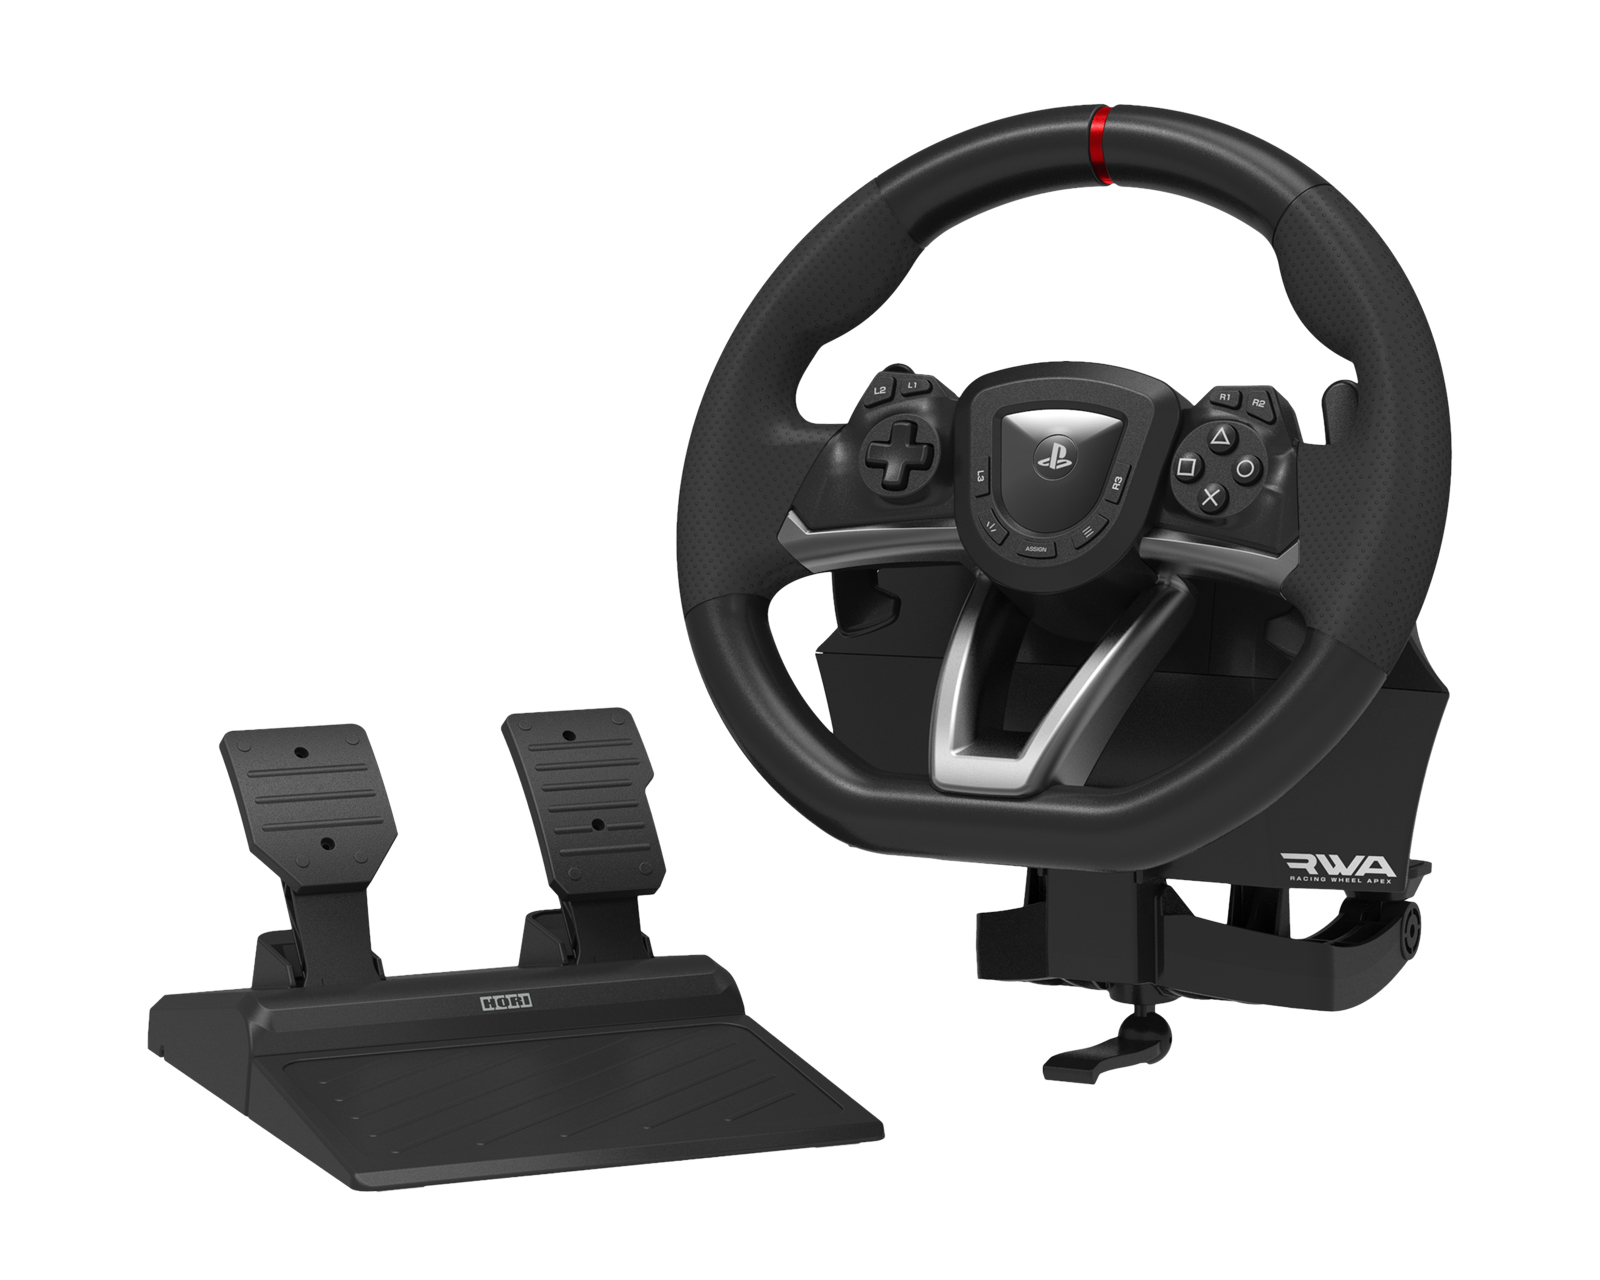 For Nintendo Switch Gaming Desk Accessories Great for Mario Kart Black  Color with Table Attachment Gaming Steering Wheel 